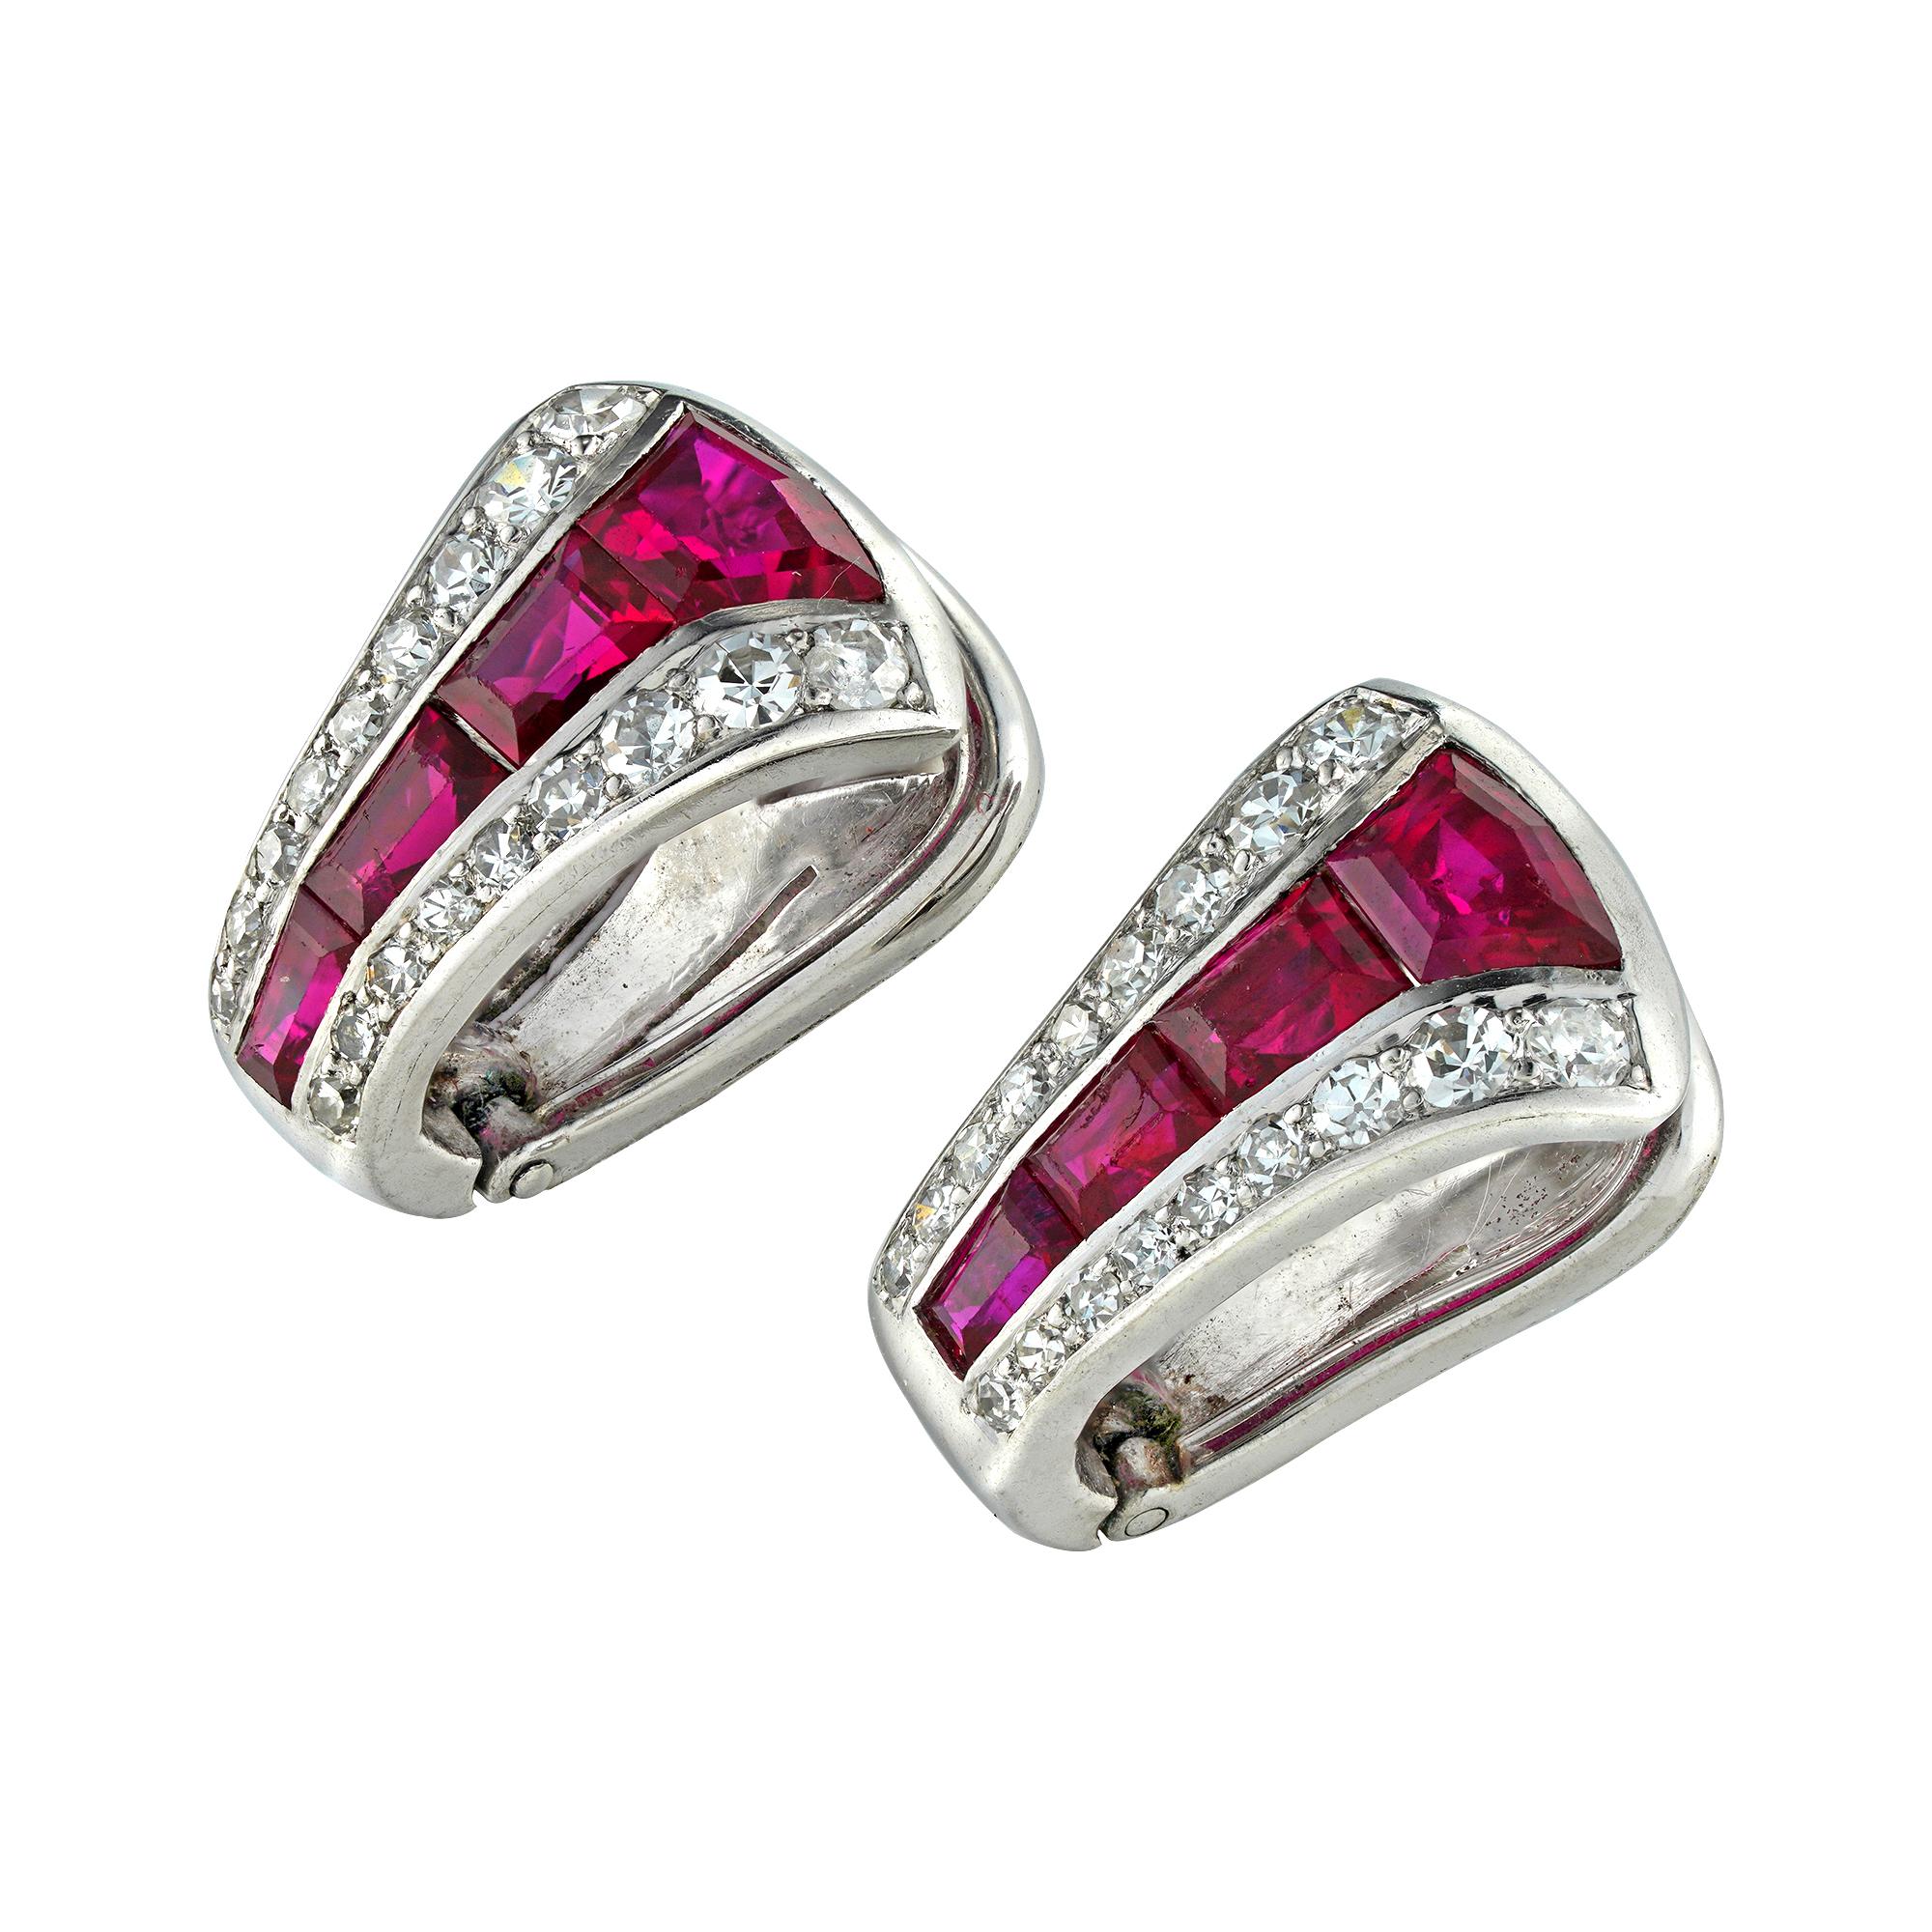 A pair of ruby and diamond clip earrings, each earring centrally-set with four trapeze-cut rubies graduating in size, set between two rows of nine graduating in size swiss-cut diamonds each, the eight rubies estimated to weigh 1.3 carats in total,